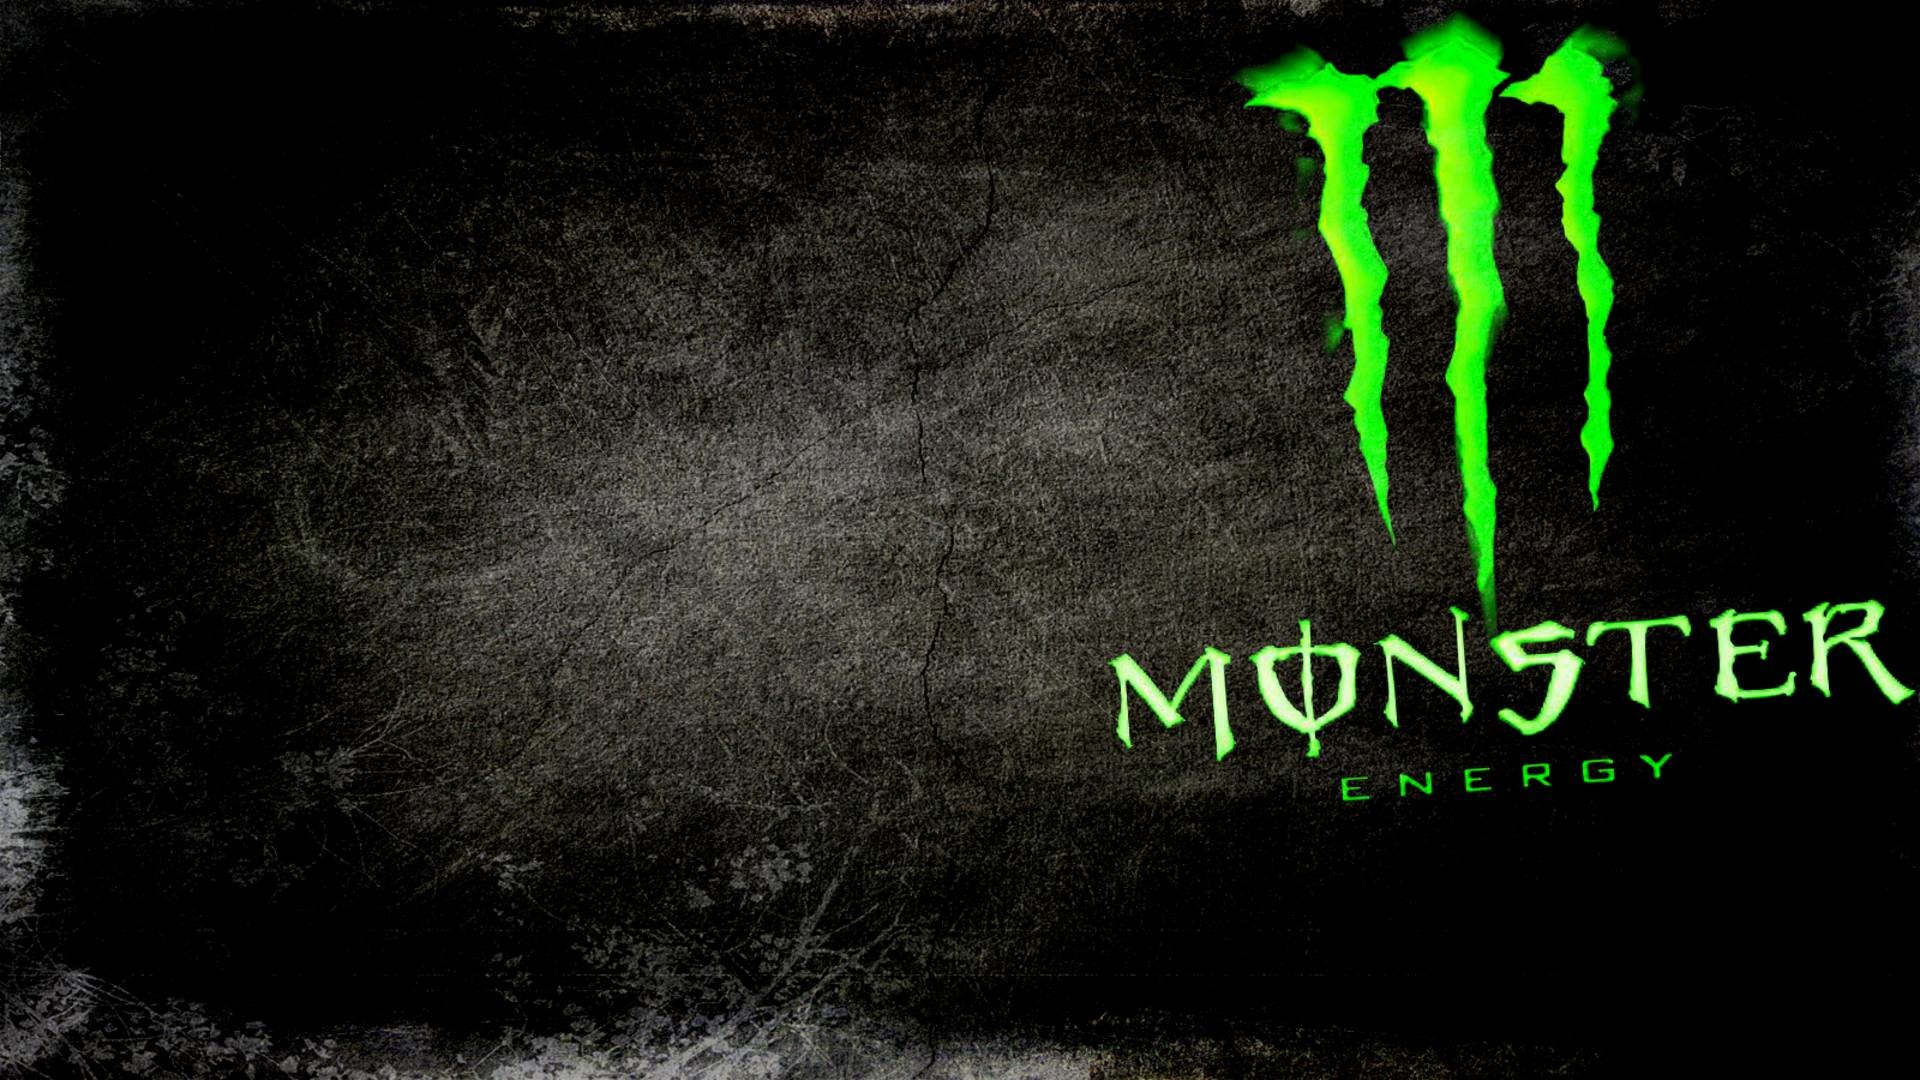 1920x1080 1588723 Monster Energy Wallpapers HD free wallpapers backgrounds .